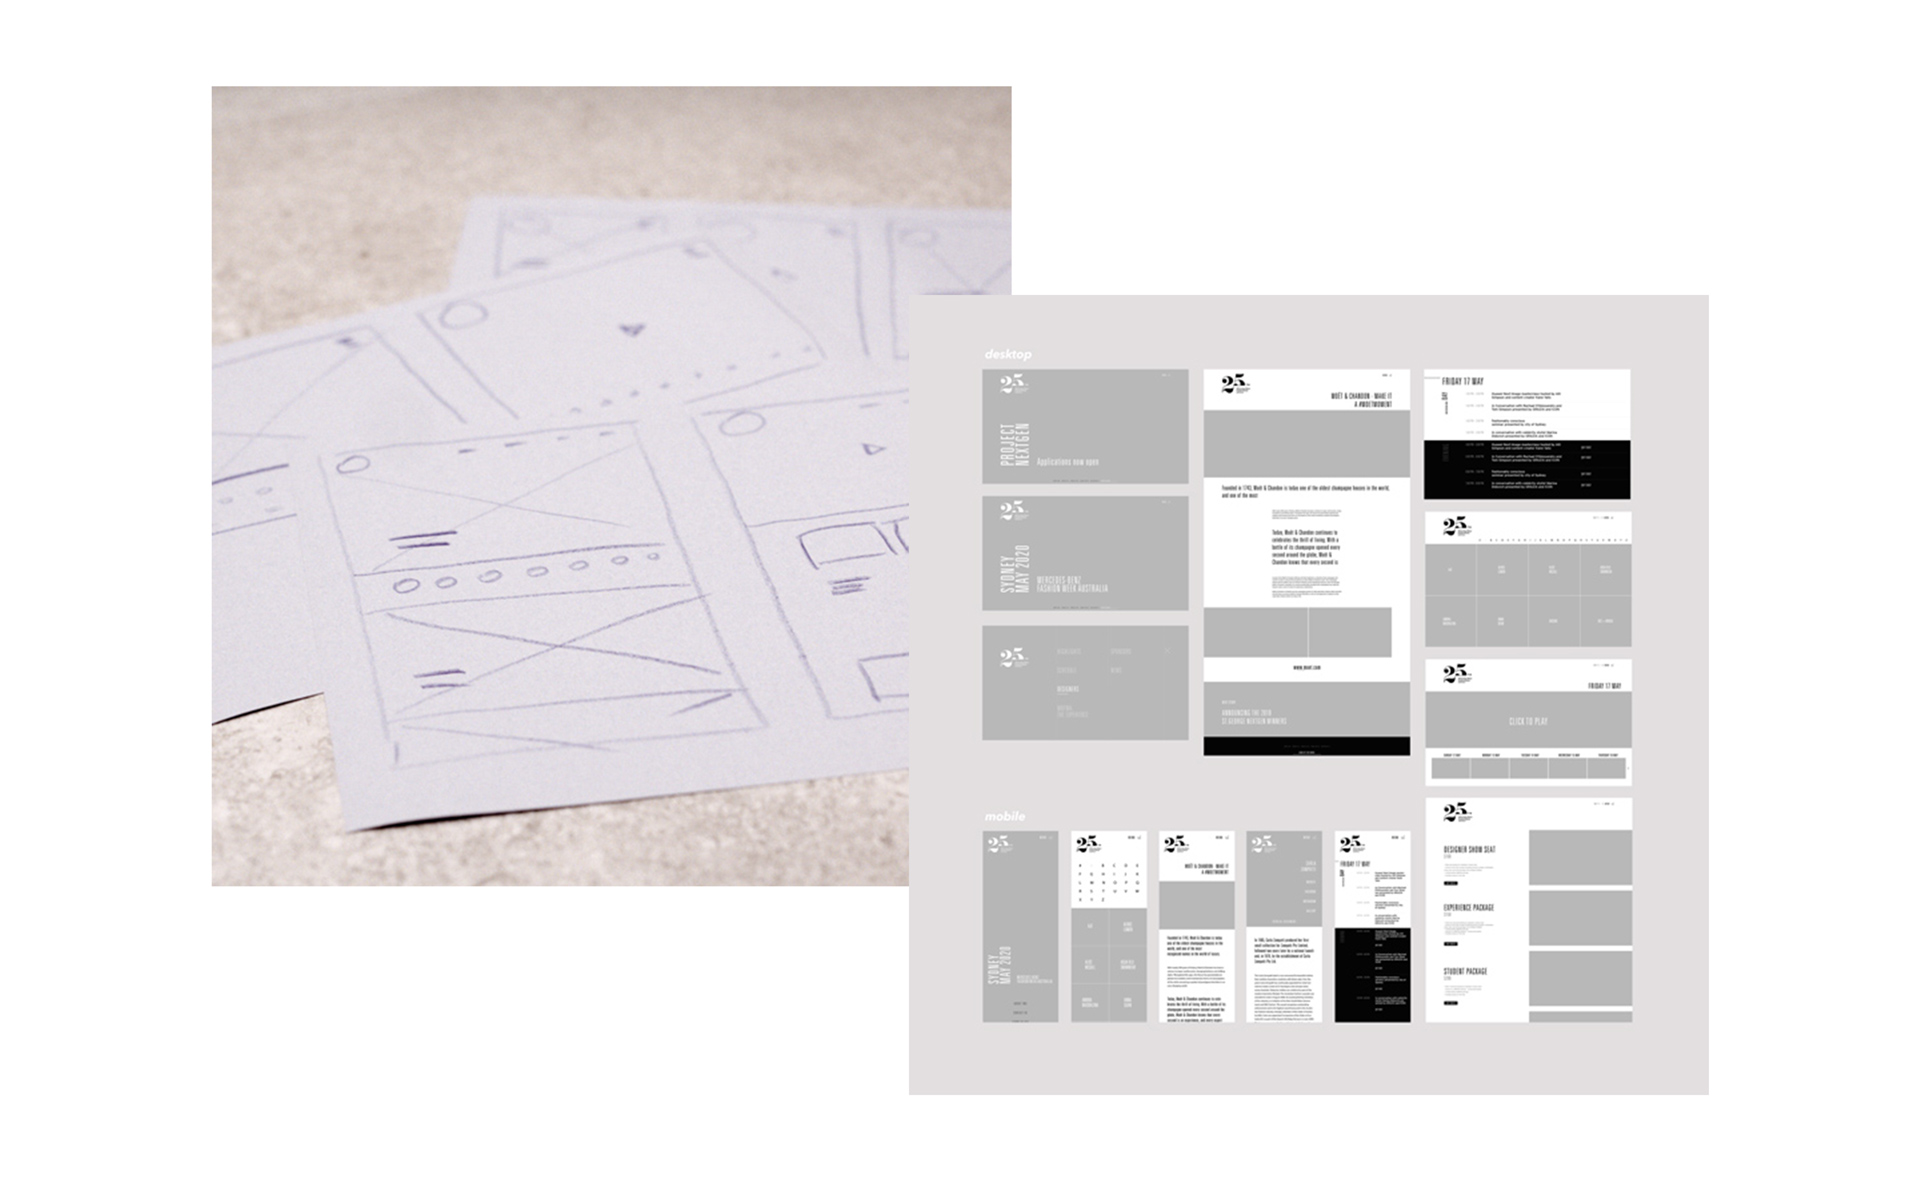 Wireframes for the home page of the website